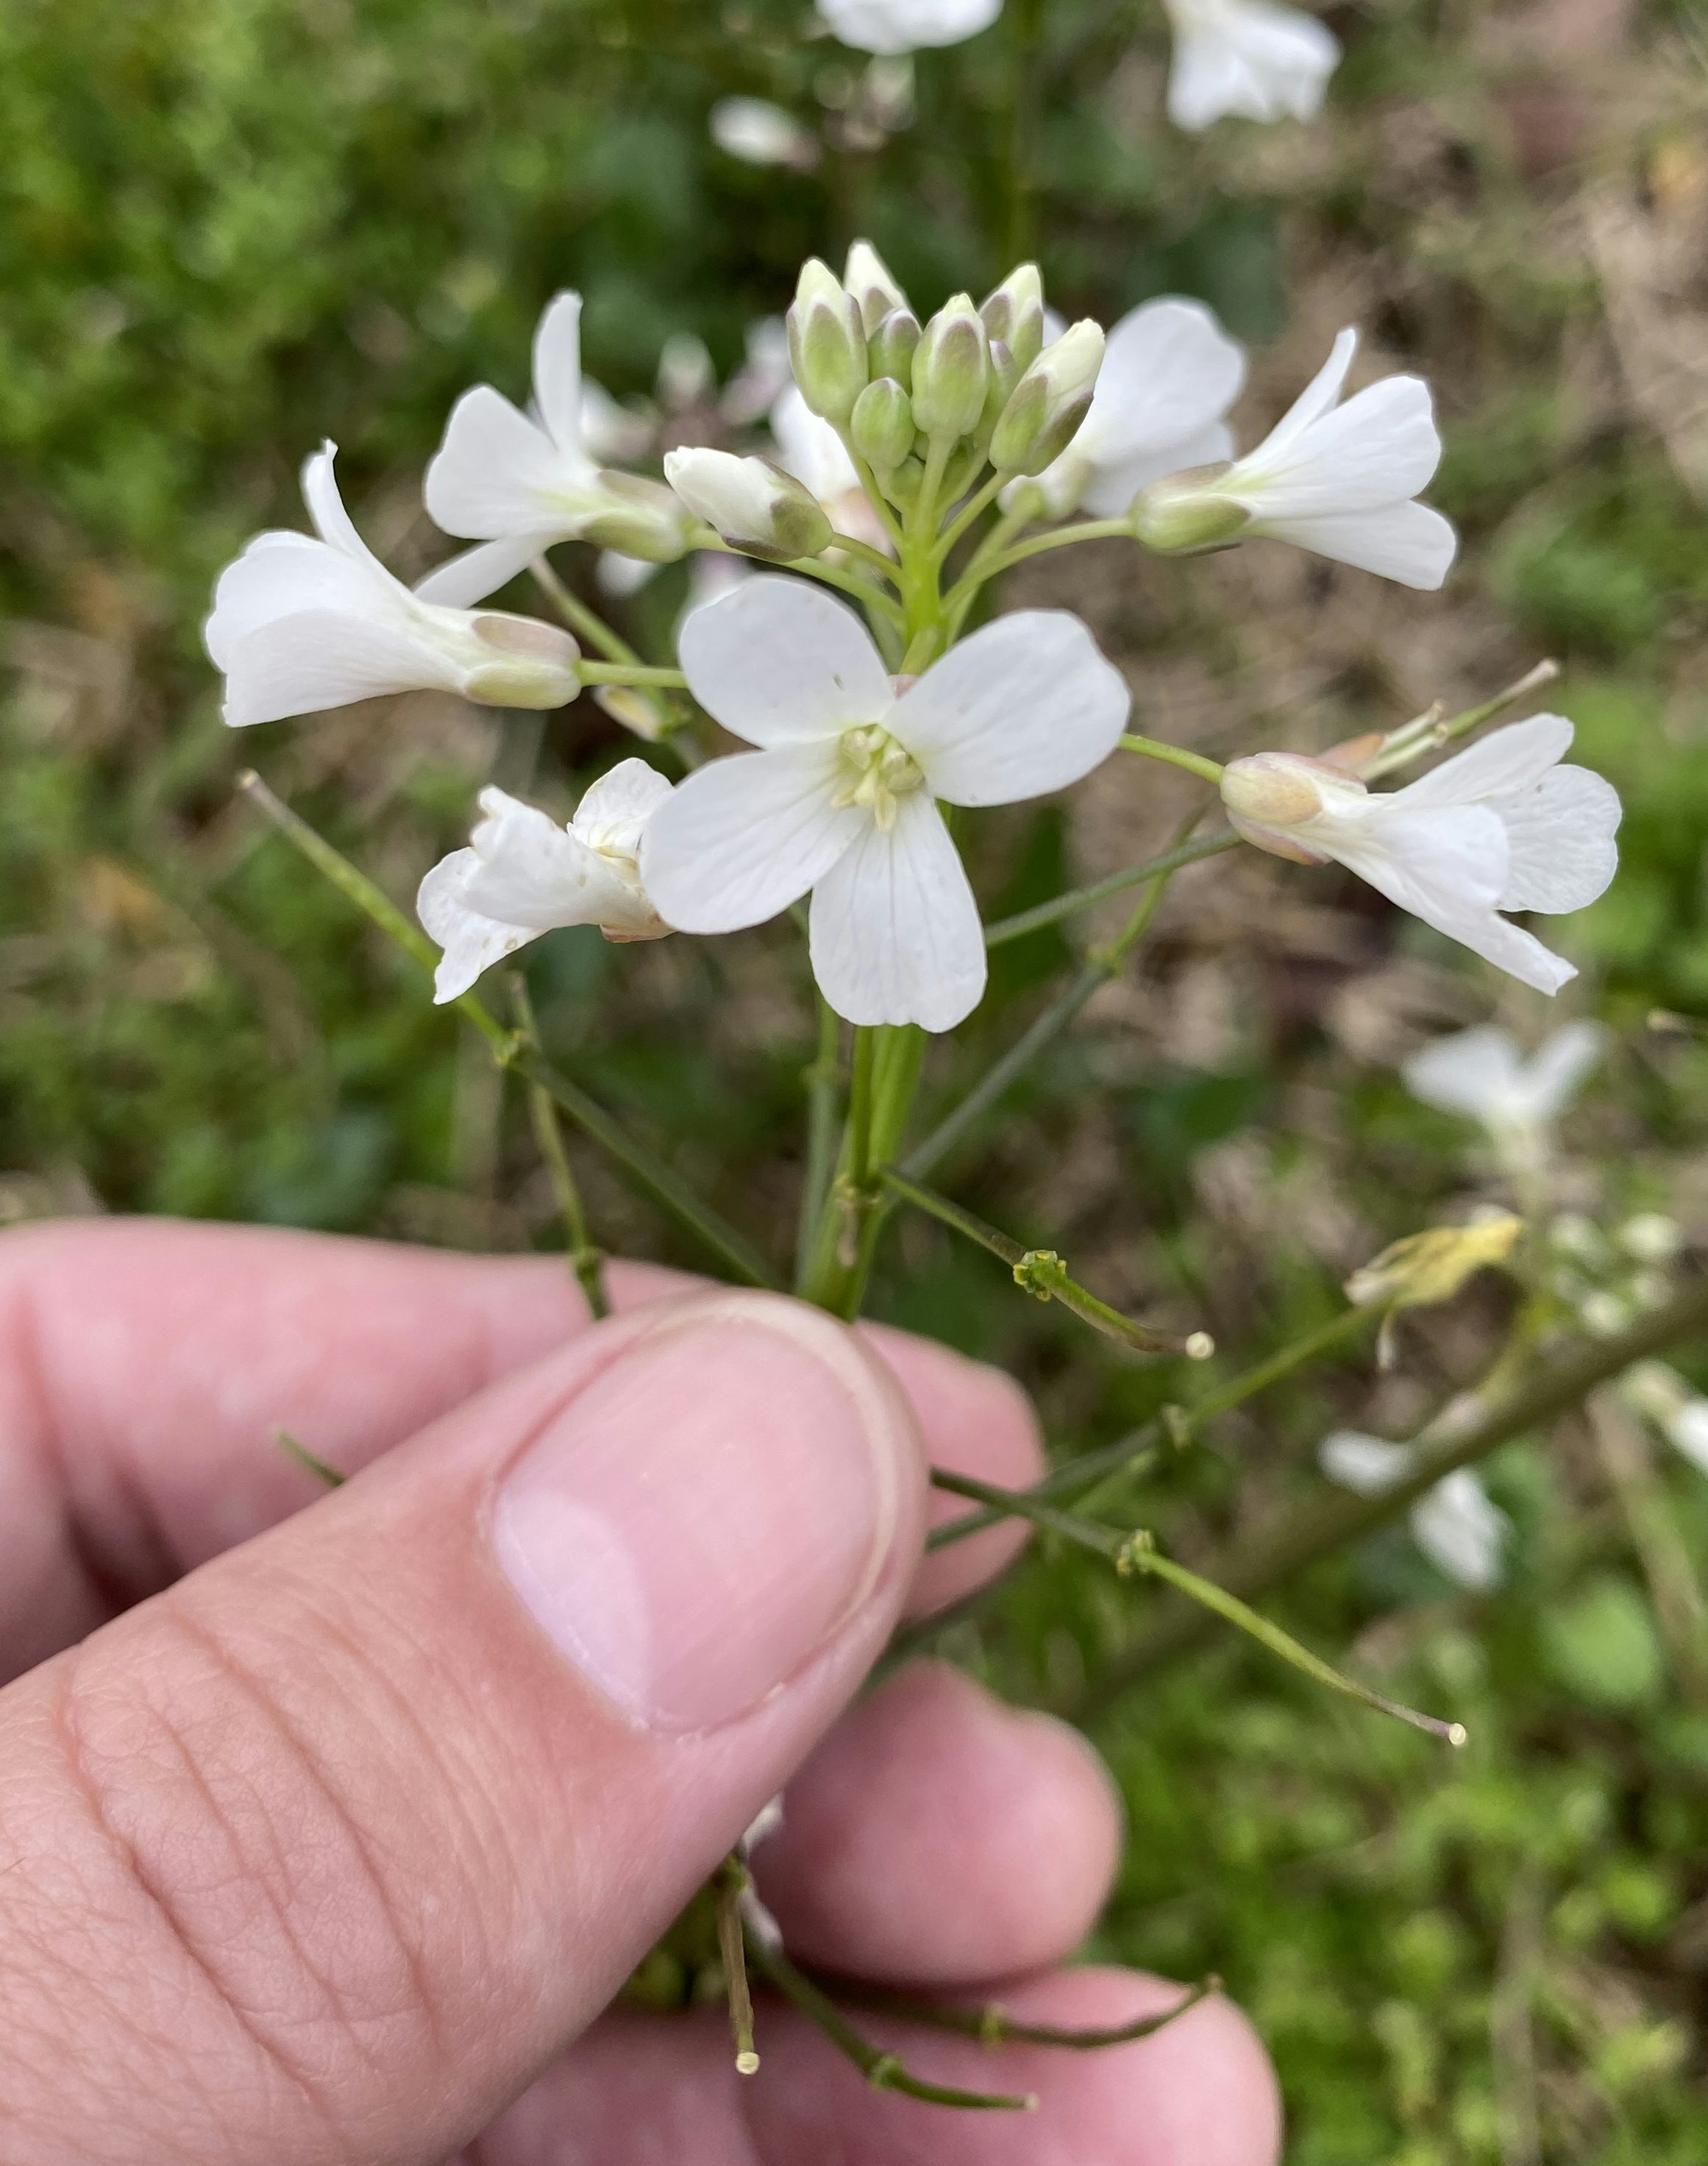 A hand holds a bulb of small white flowers